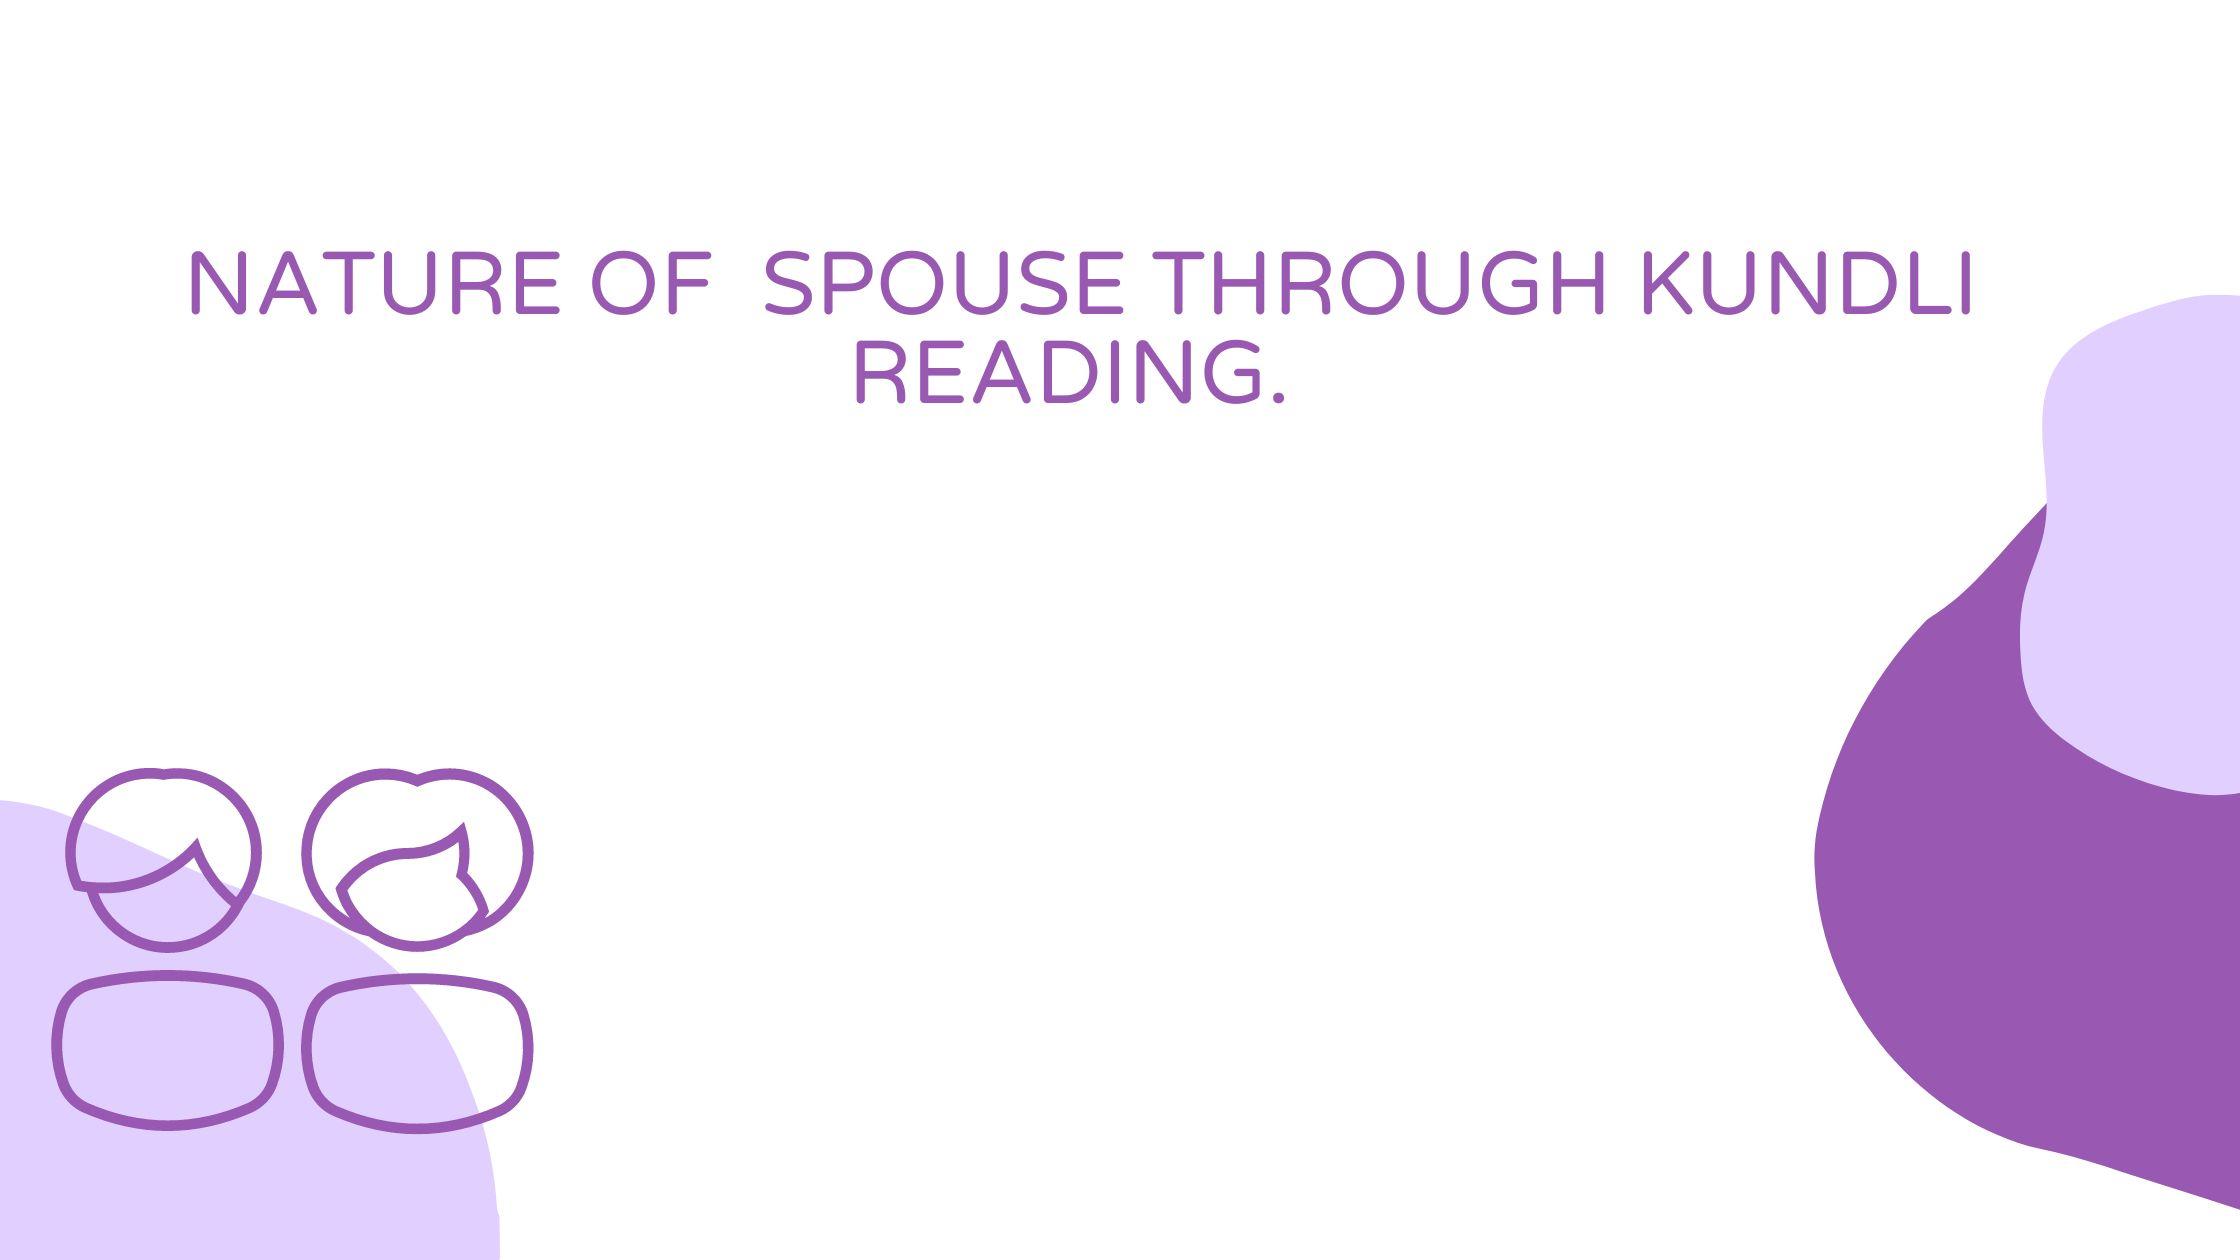 How the nature of spouse is determined through kundali reading. Which aspects of nature can be told.